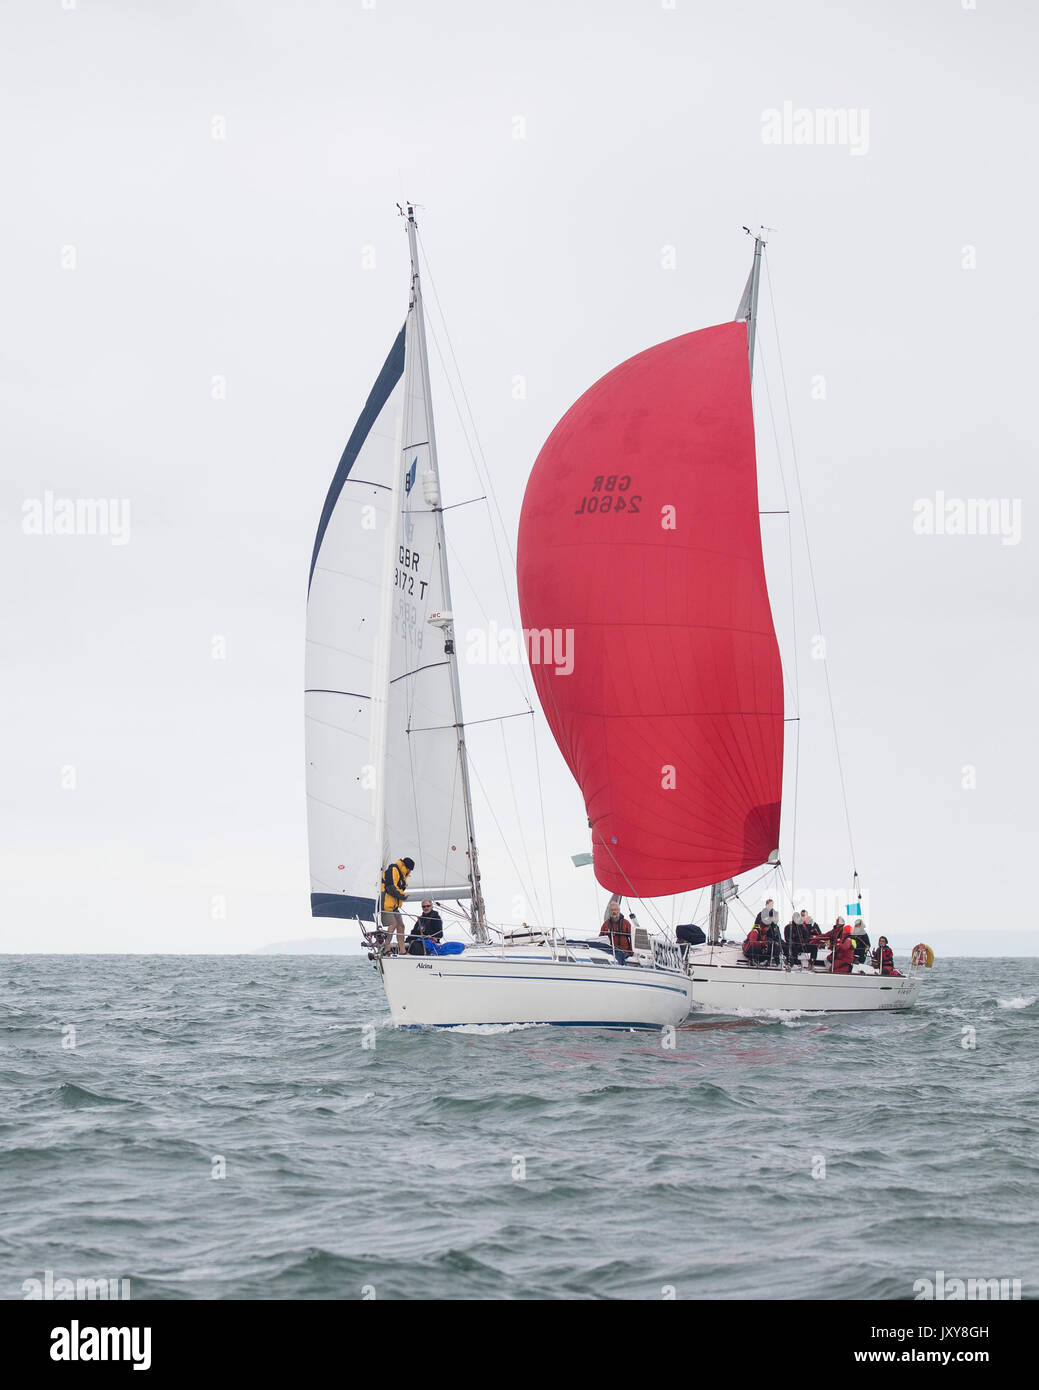 Beneteau First 35 GBR2460L under spinnaker in a close match with GBR1172T Alcina during the 2017 Round the Island Race Stock Photo